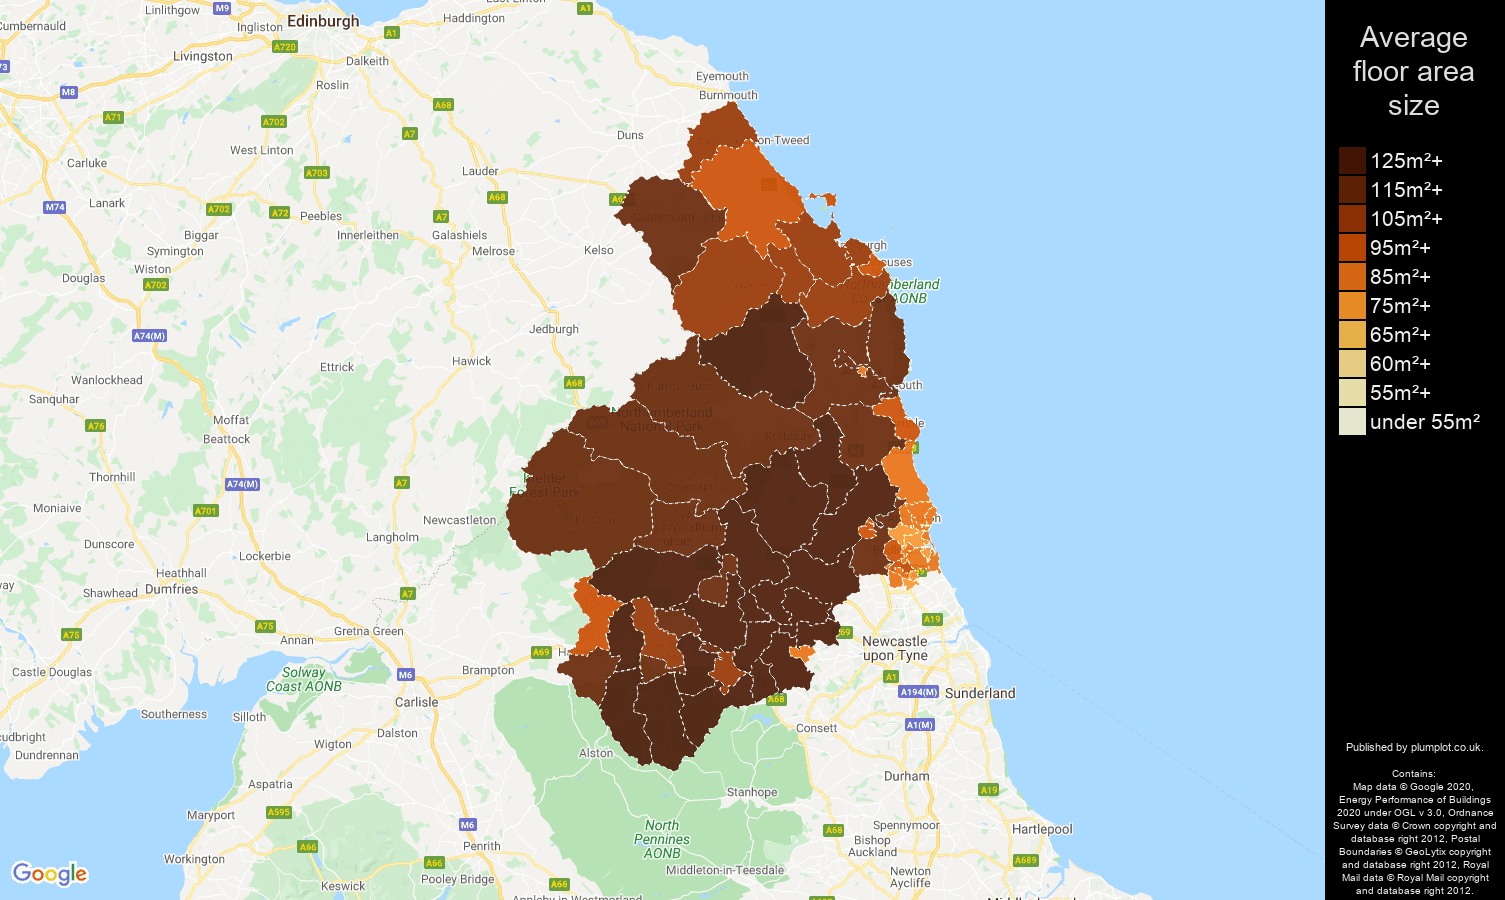 Northumberland map of average floor area size of houses